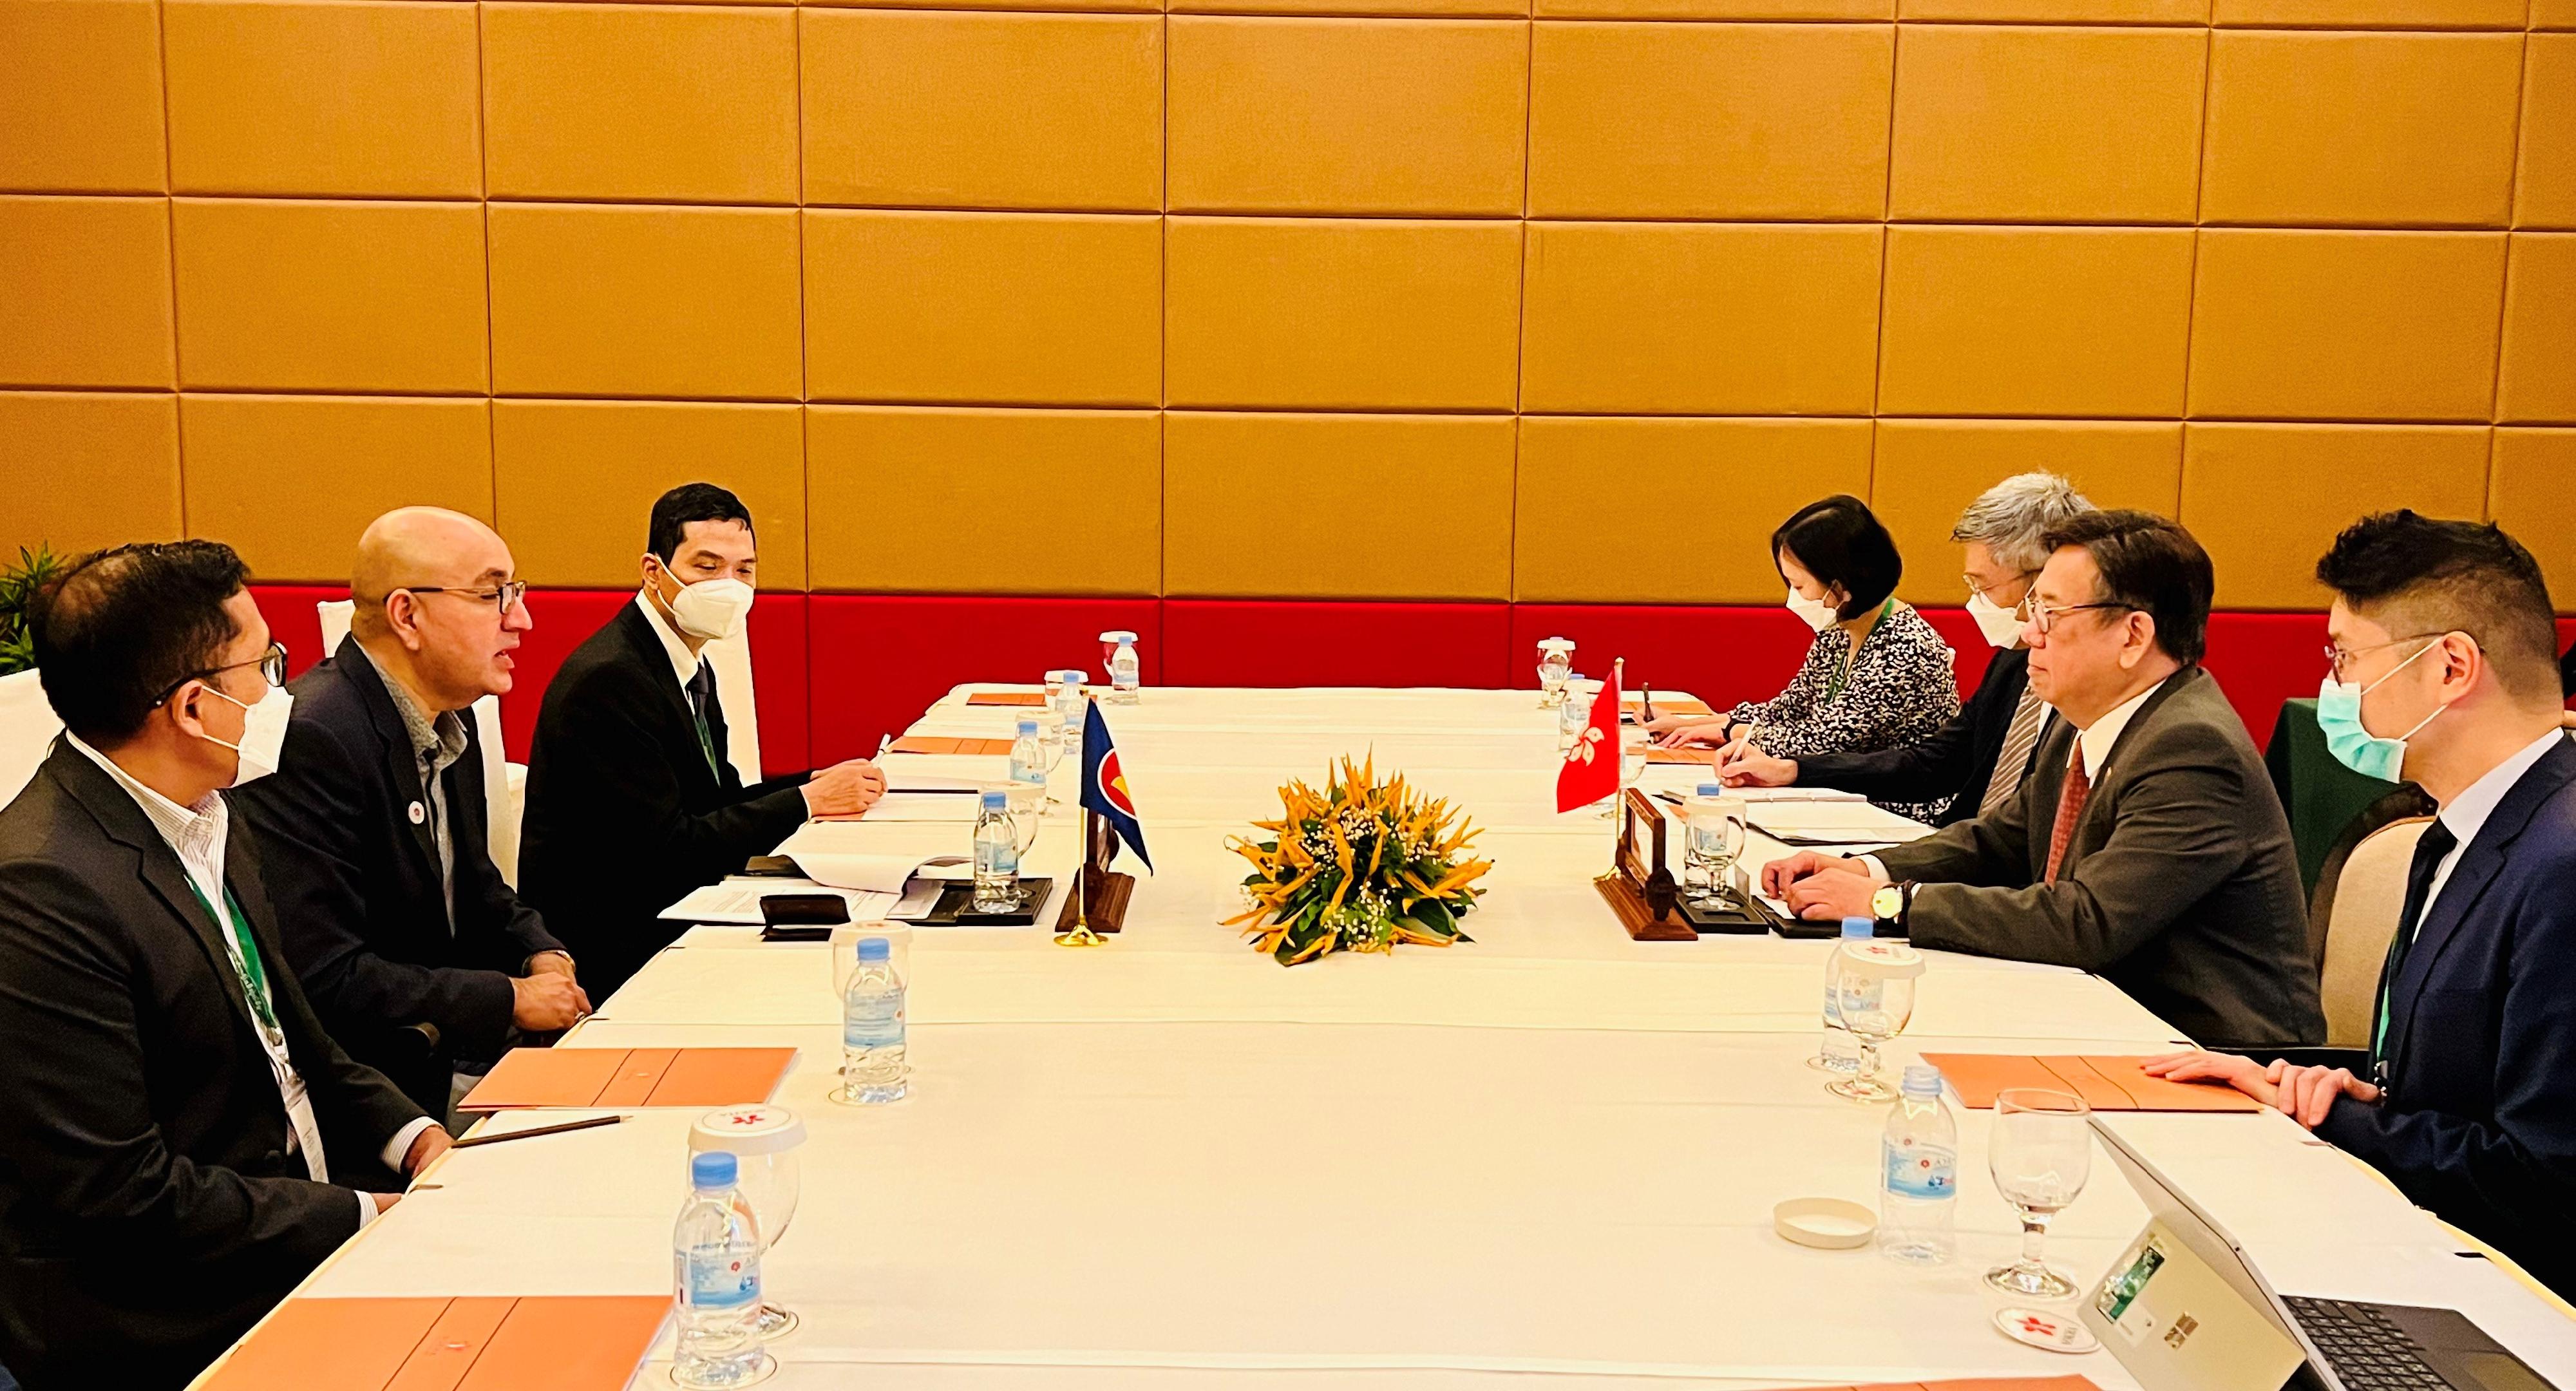 The Secretary for Commerce and Economic Development, Mr Algernon Yau (second right), had a bilateral meeting with the Deputy Secretary-General of the Association of Southeast Asian Nations, Mr Satvinder Singh (second left), in Siem Reap, Cambodia, today (September 17) to update him on Hong Kong’s preparatory work in seeking early accession to the Regional Comprehensive Economic Partnership.